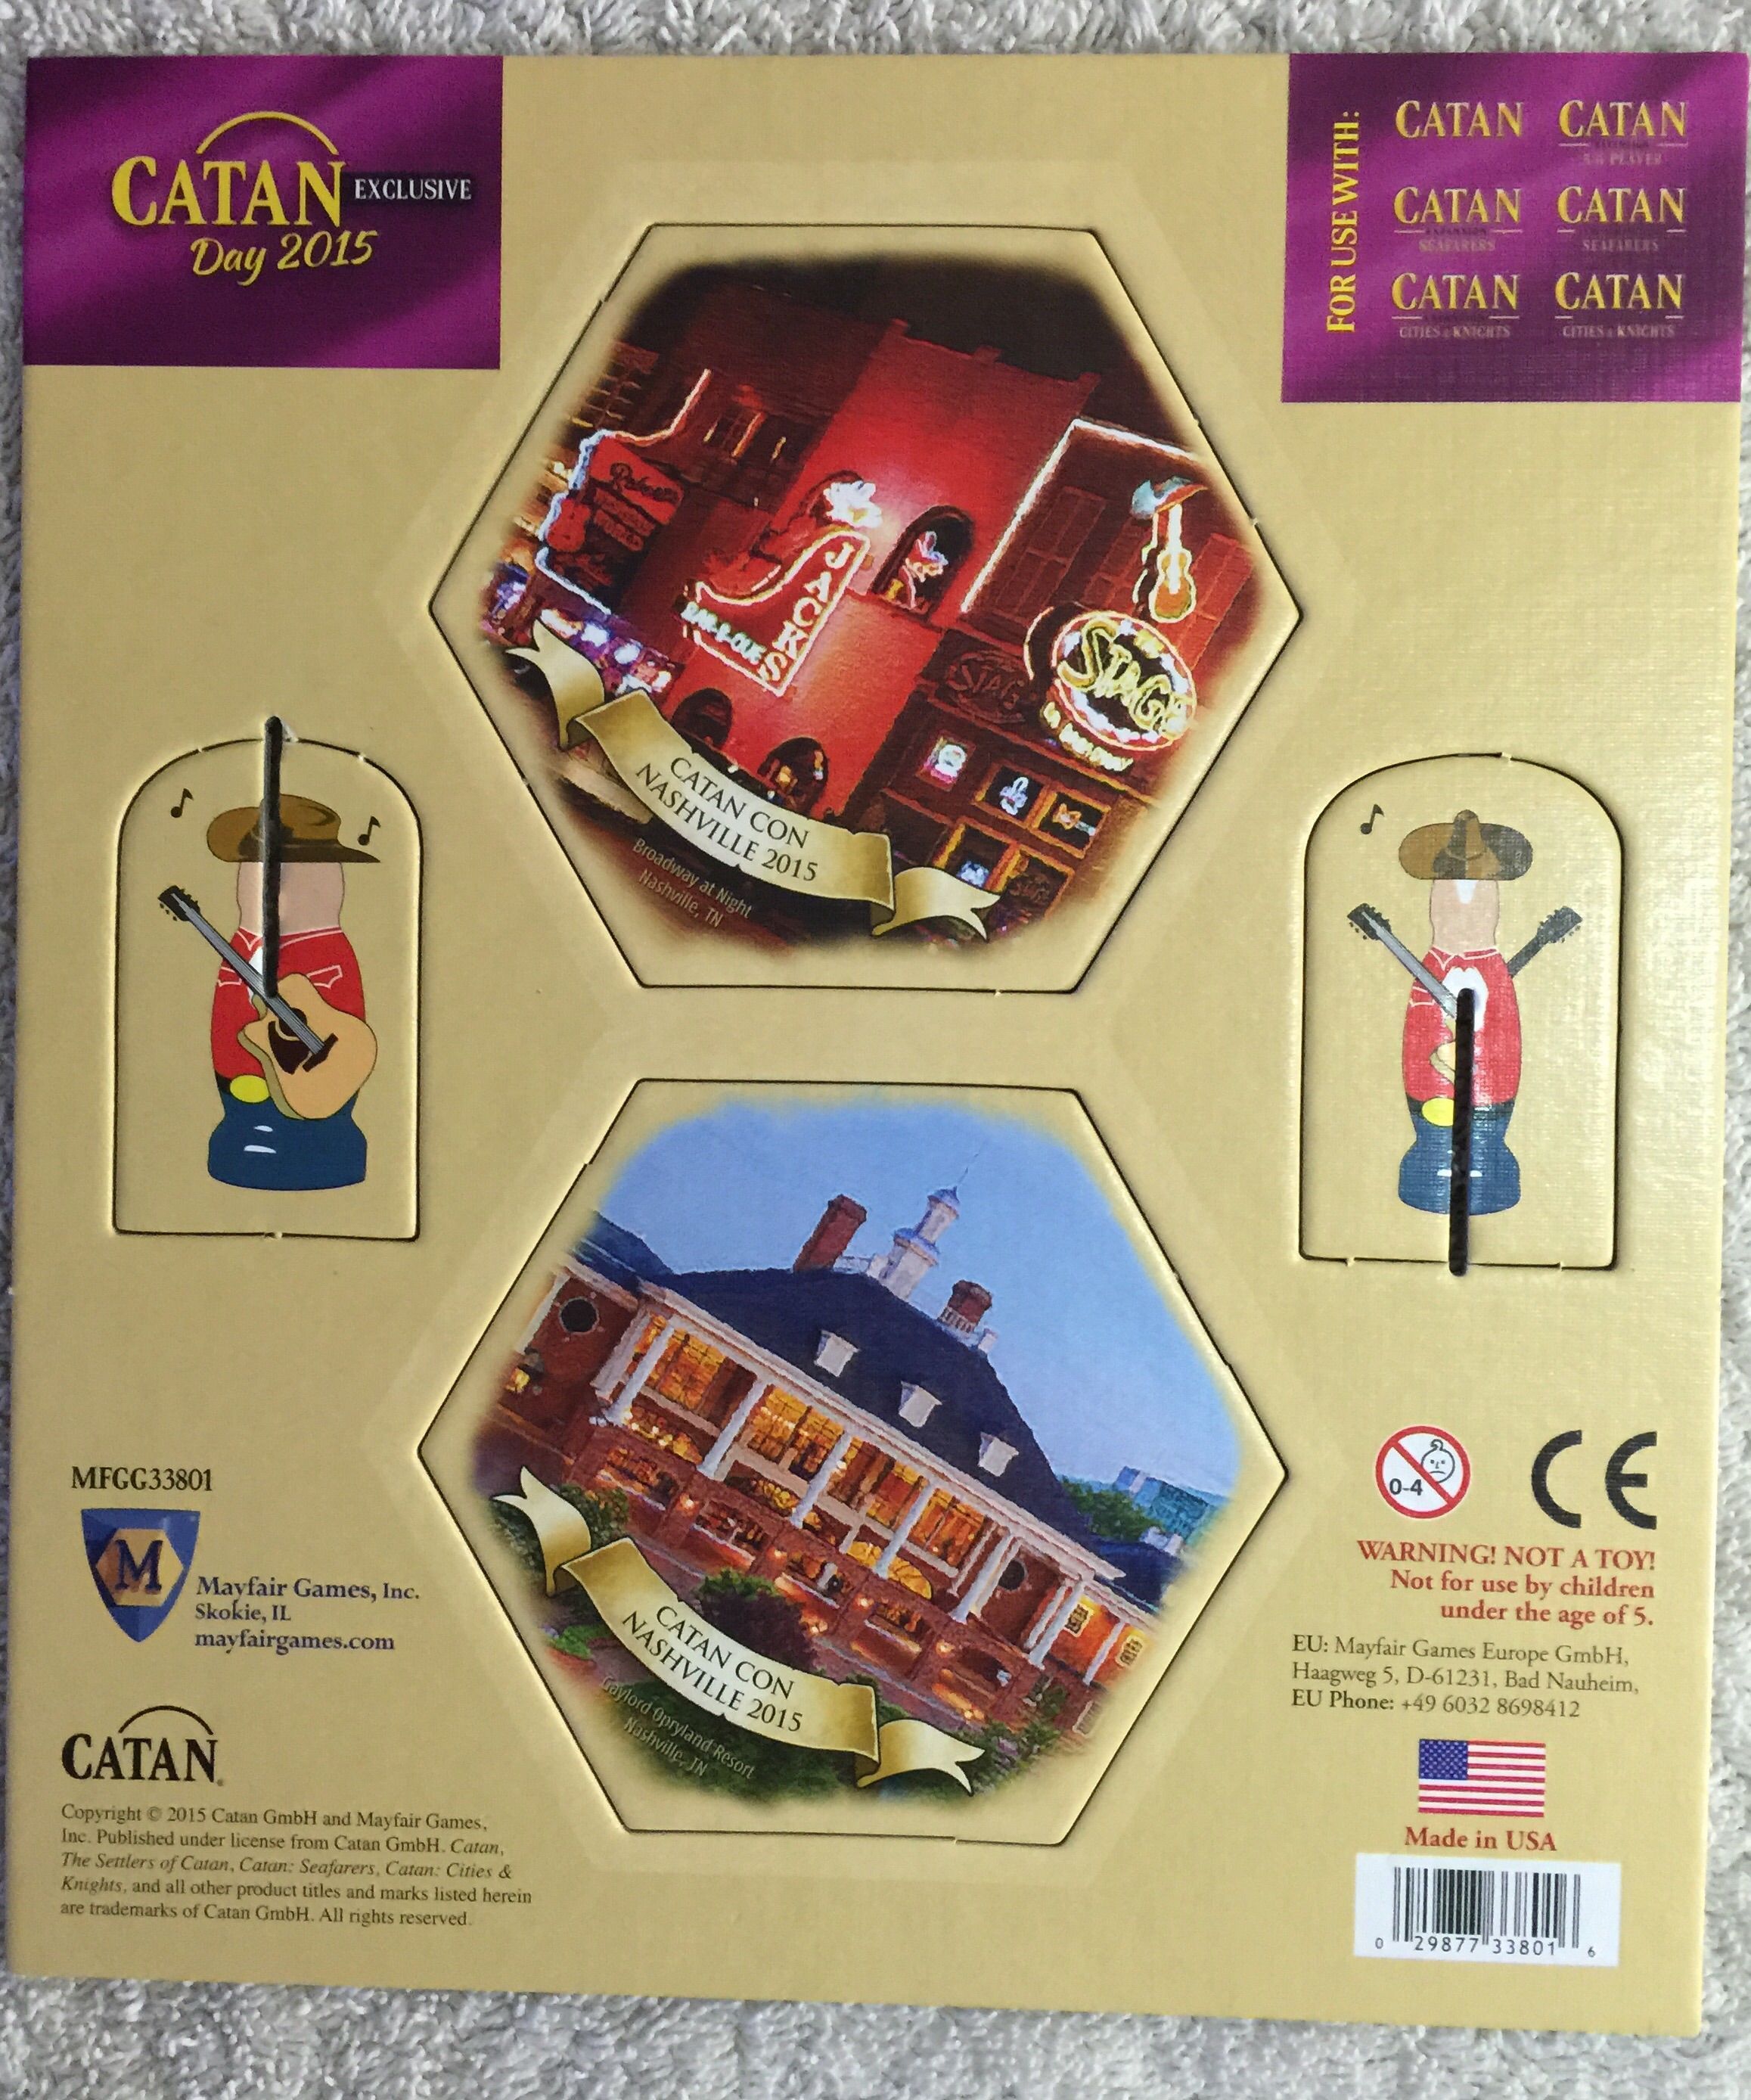 Catan: Catan Day 2015 Exclusive Expansion